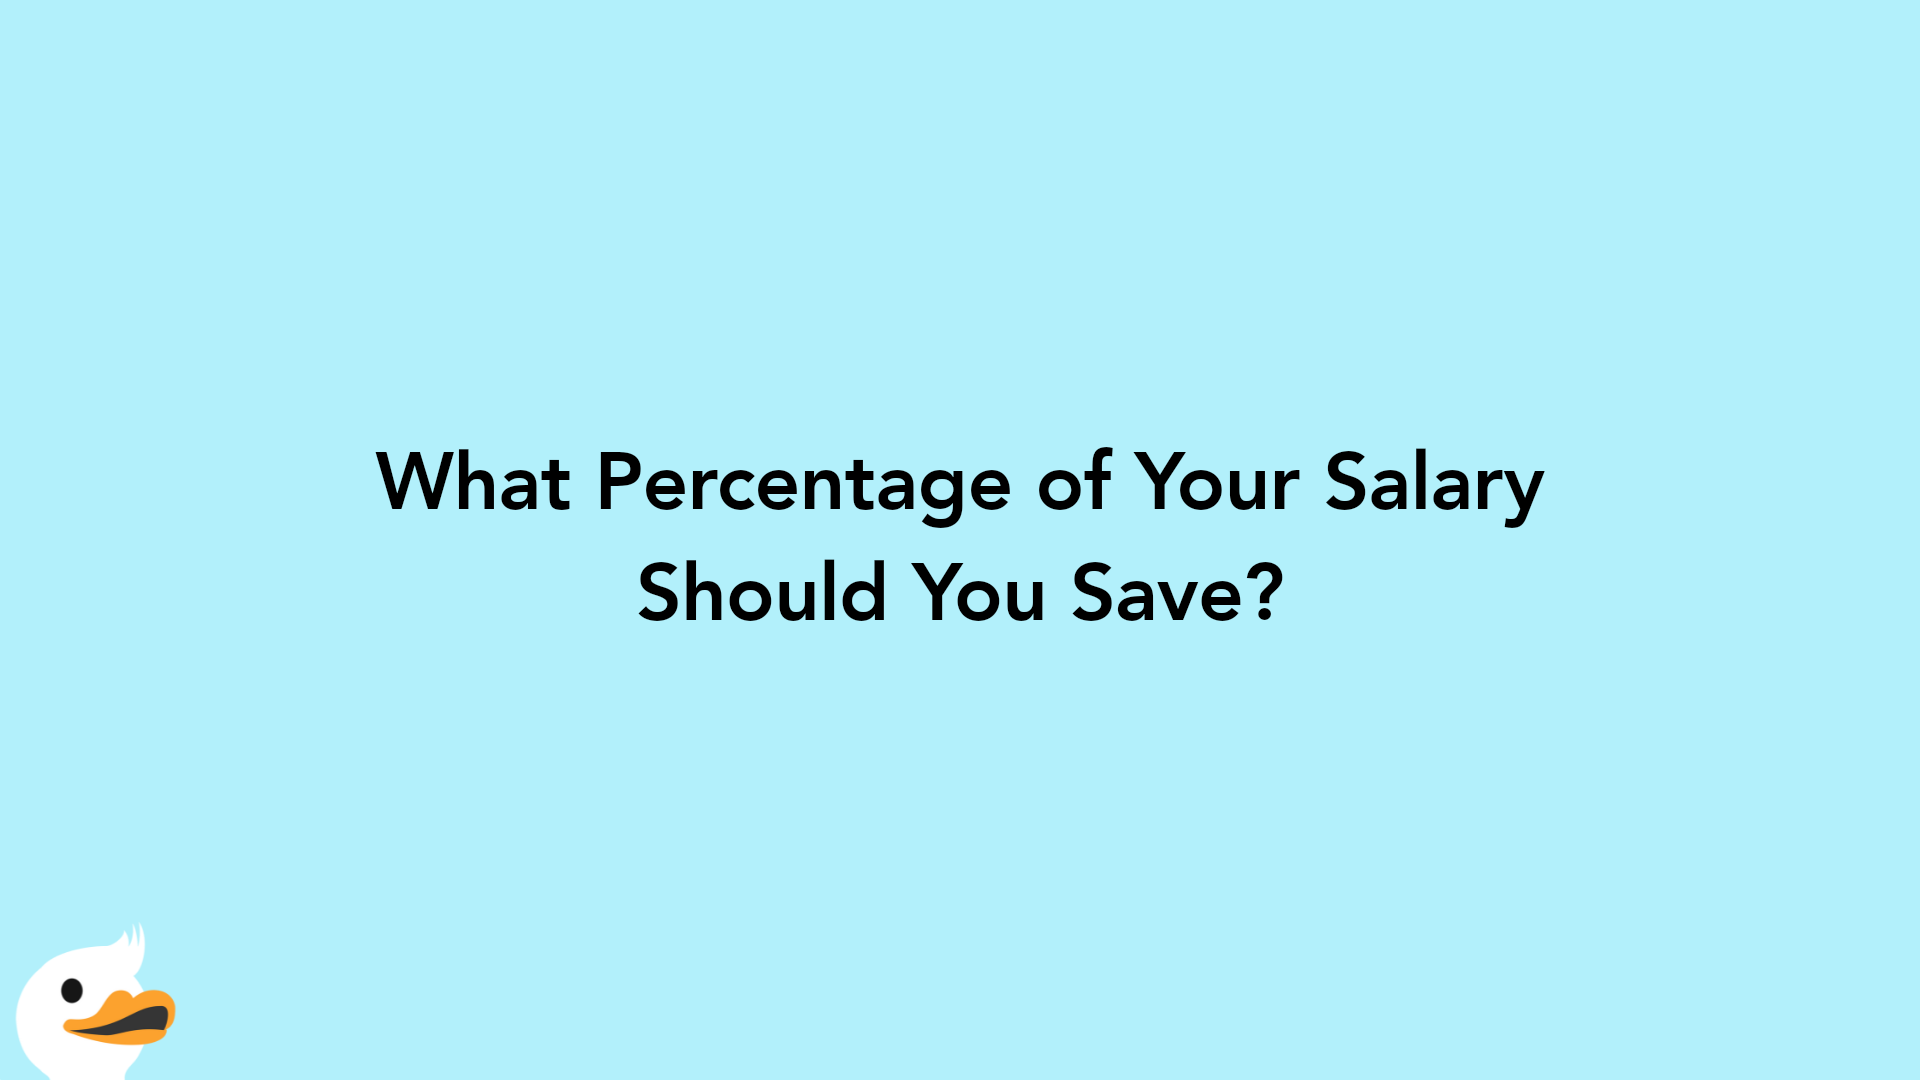 What Percentage of Your Salary Should You Save?